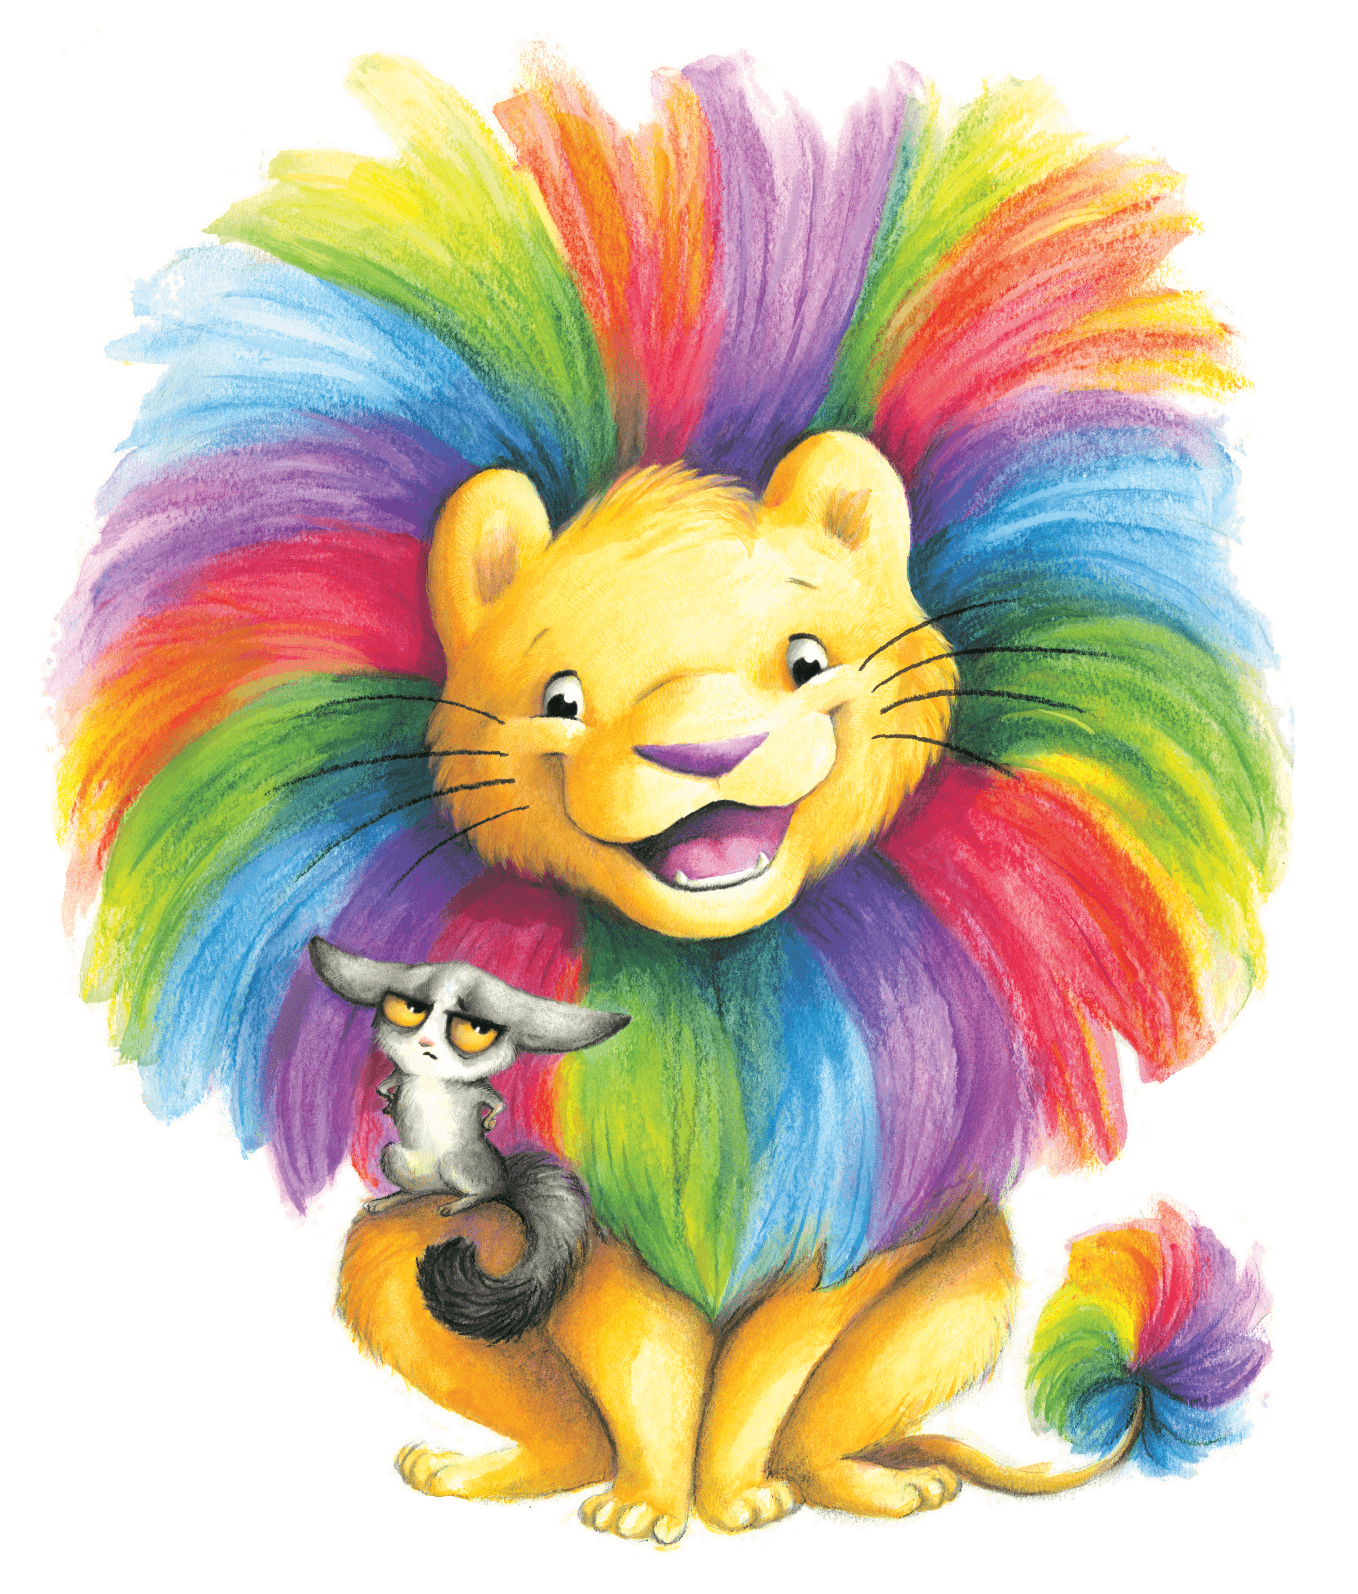 Illustrated Guion the Lion character with colorful mane